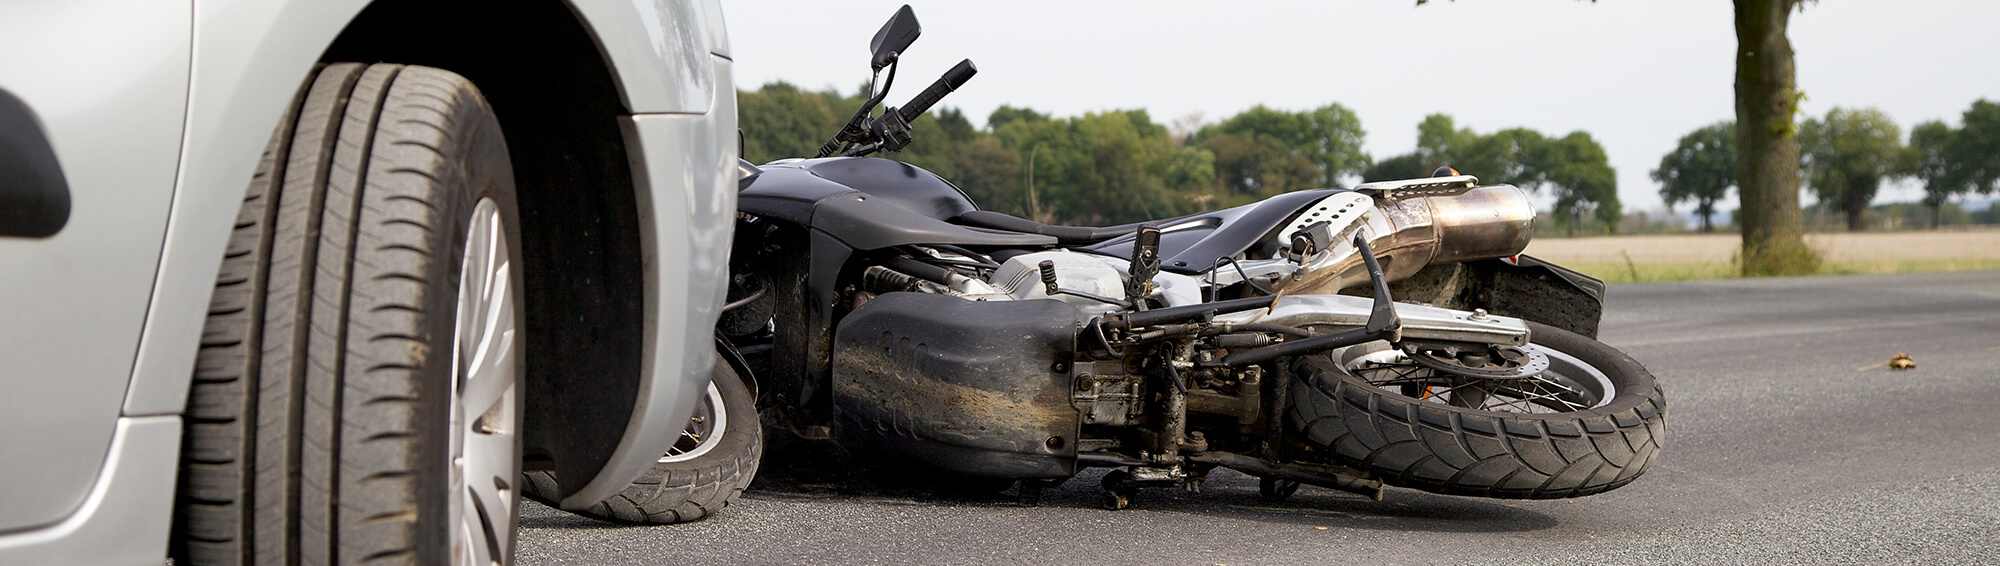 Inattentive Drivers Can Be Held Liable When They Injure Motorcyclists